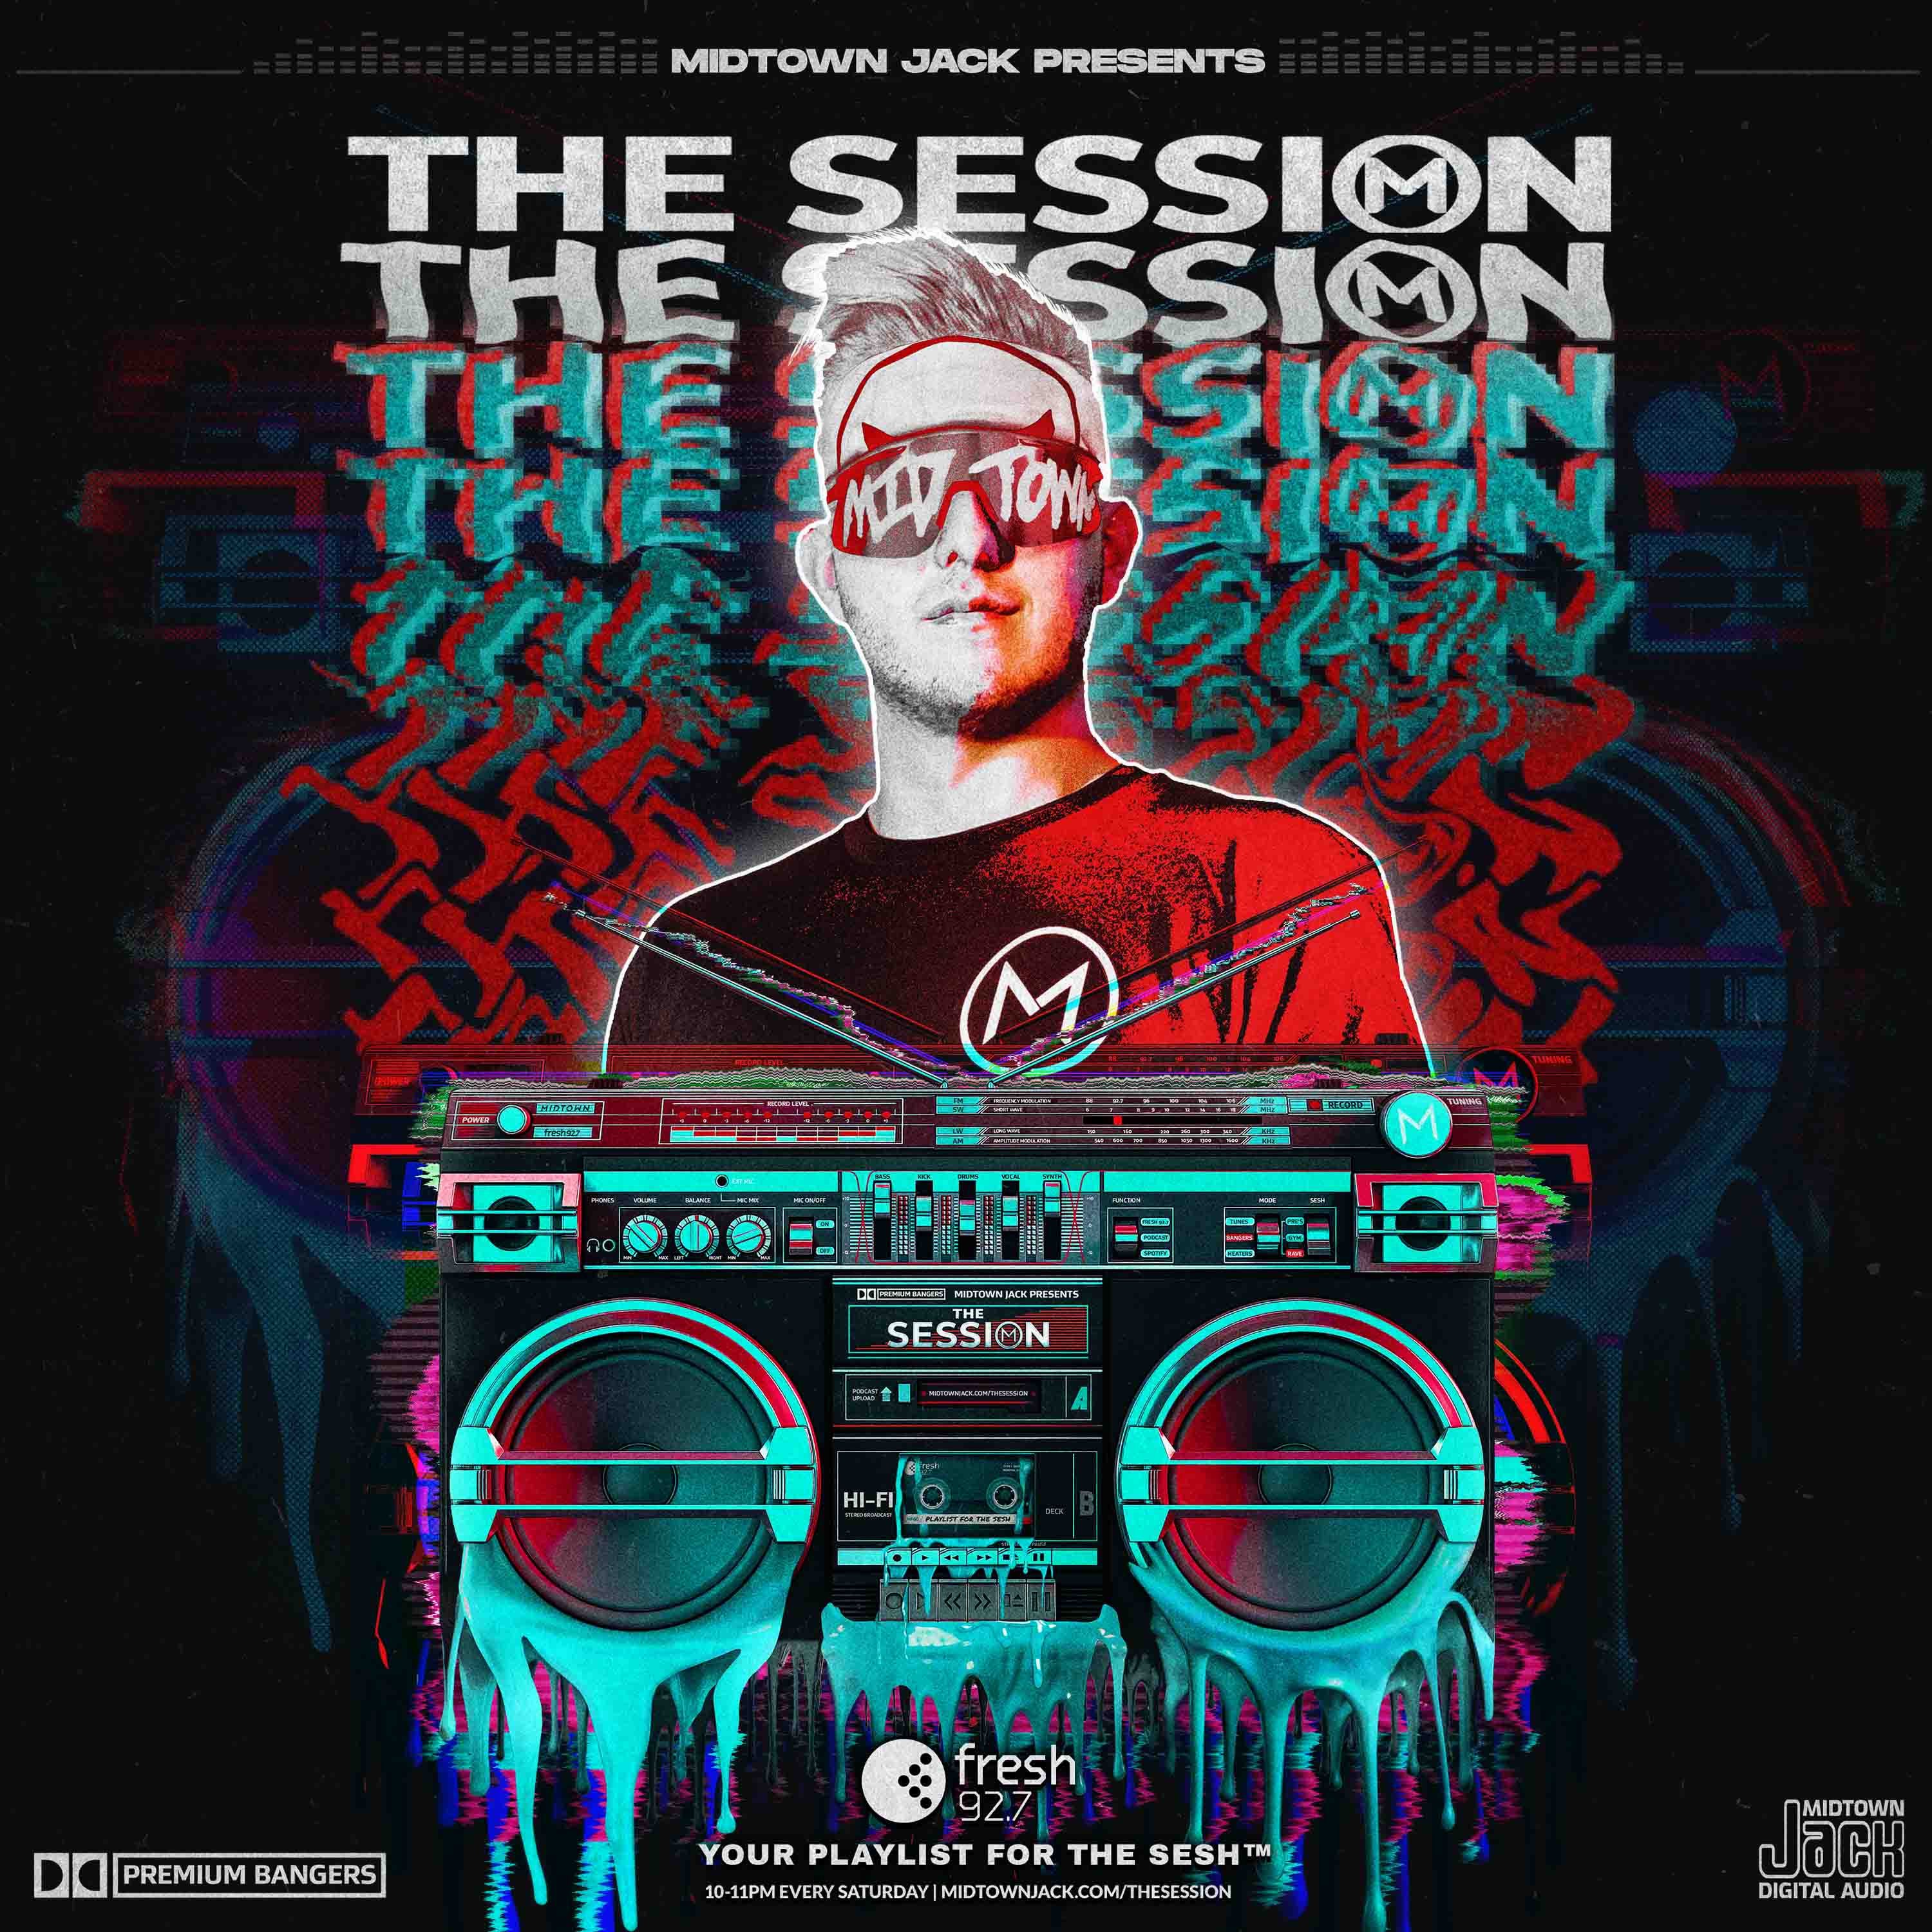 Midtown Jack Presents The Session - Episode 16 ft NATH JENNINGS